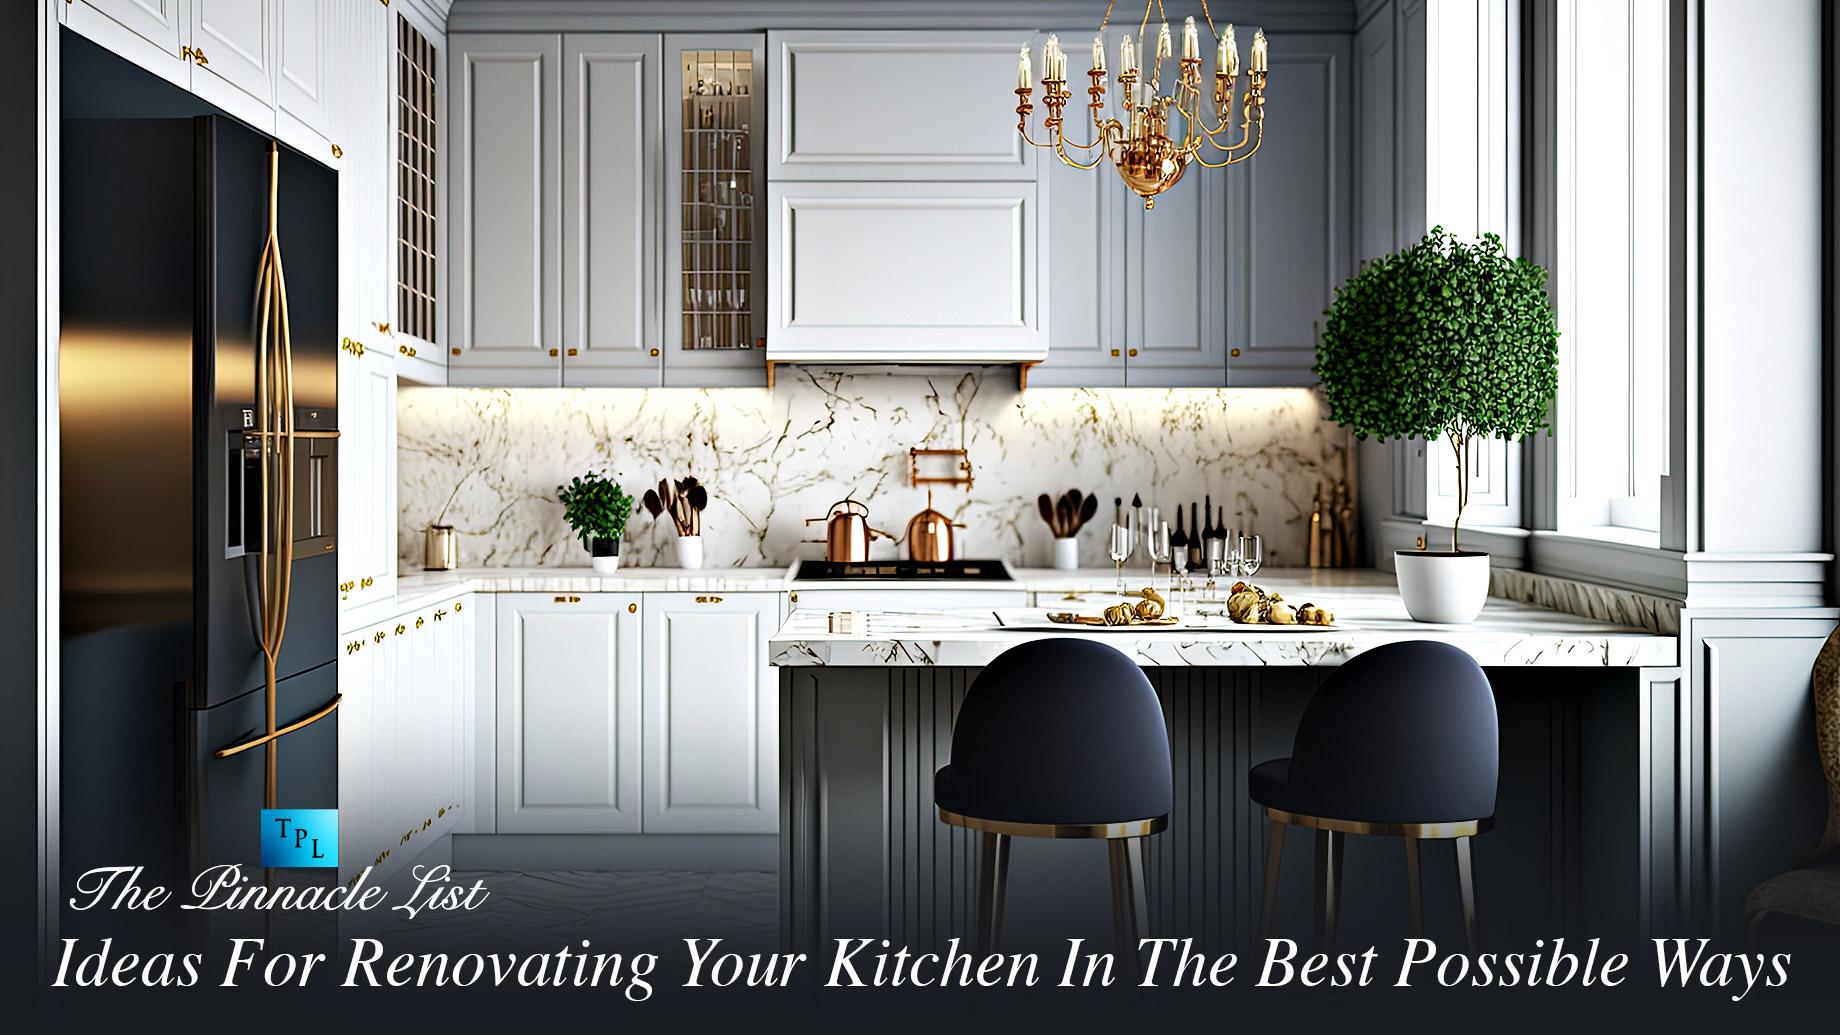 Ideas For Renovating Your Kitchen In The Best Possible Ways